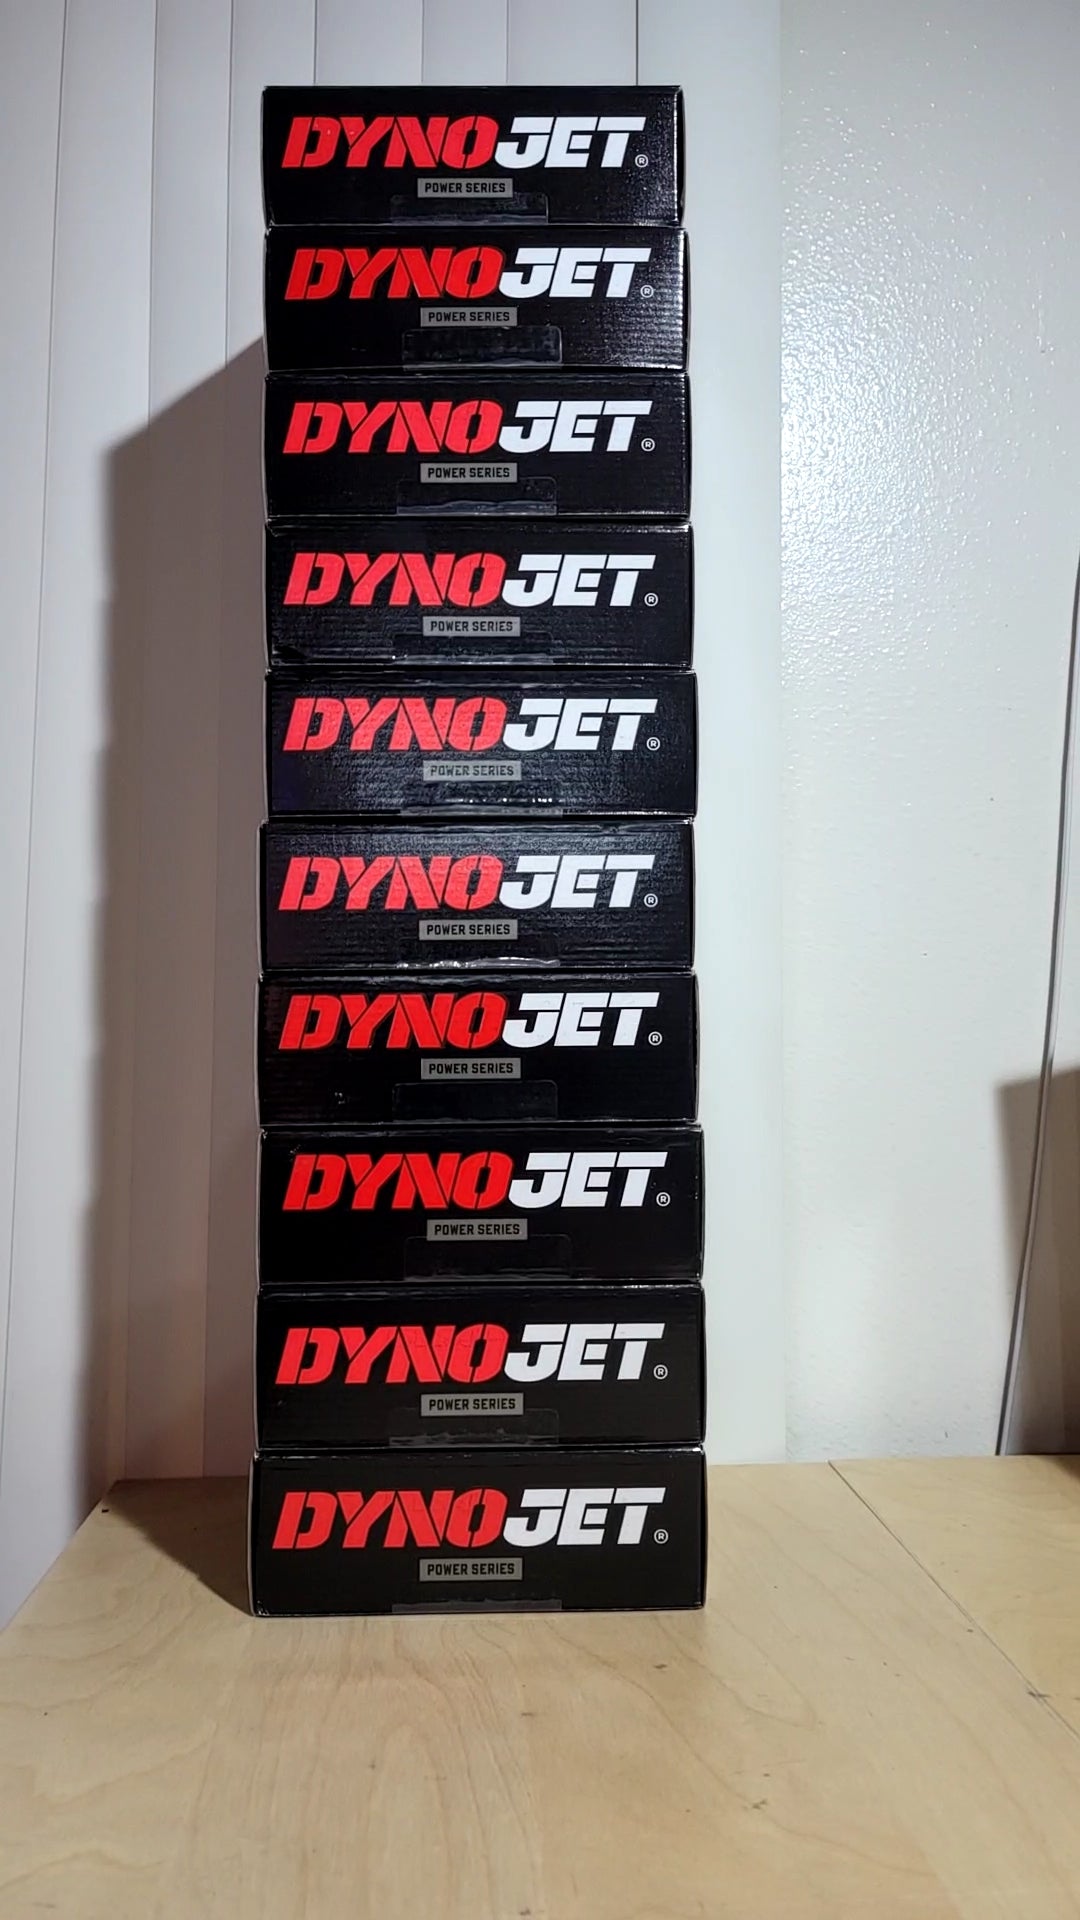 WE HAVE LOTS OF DYNOJET PRODUCTS AVAILABLE 